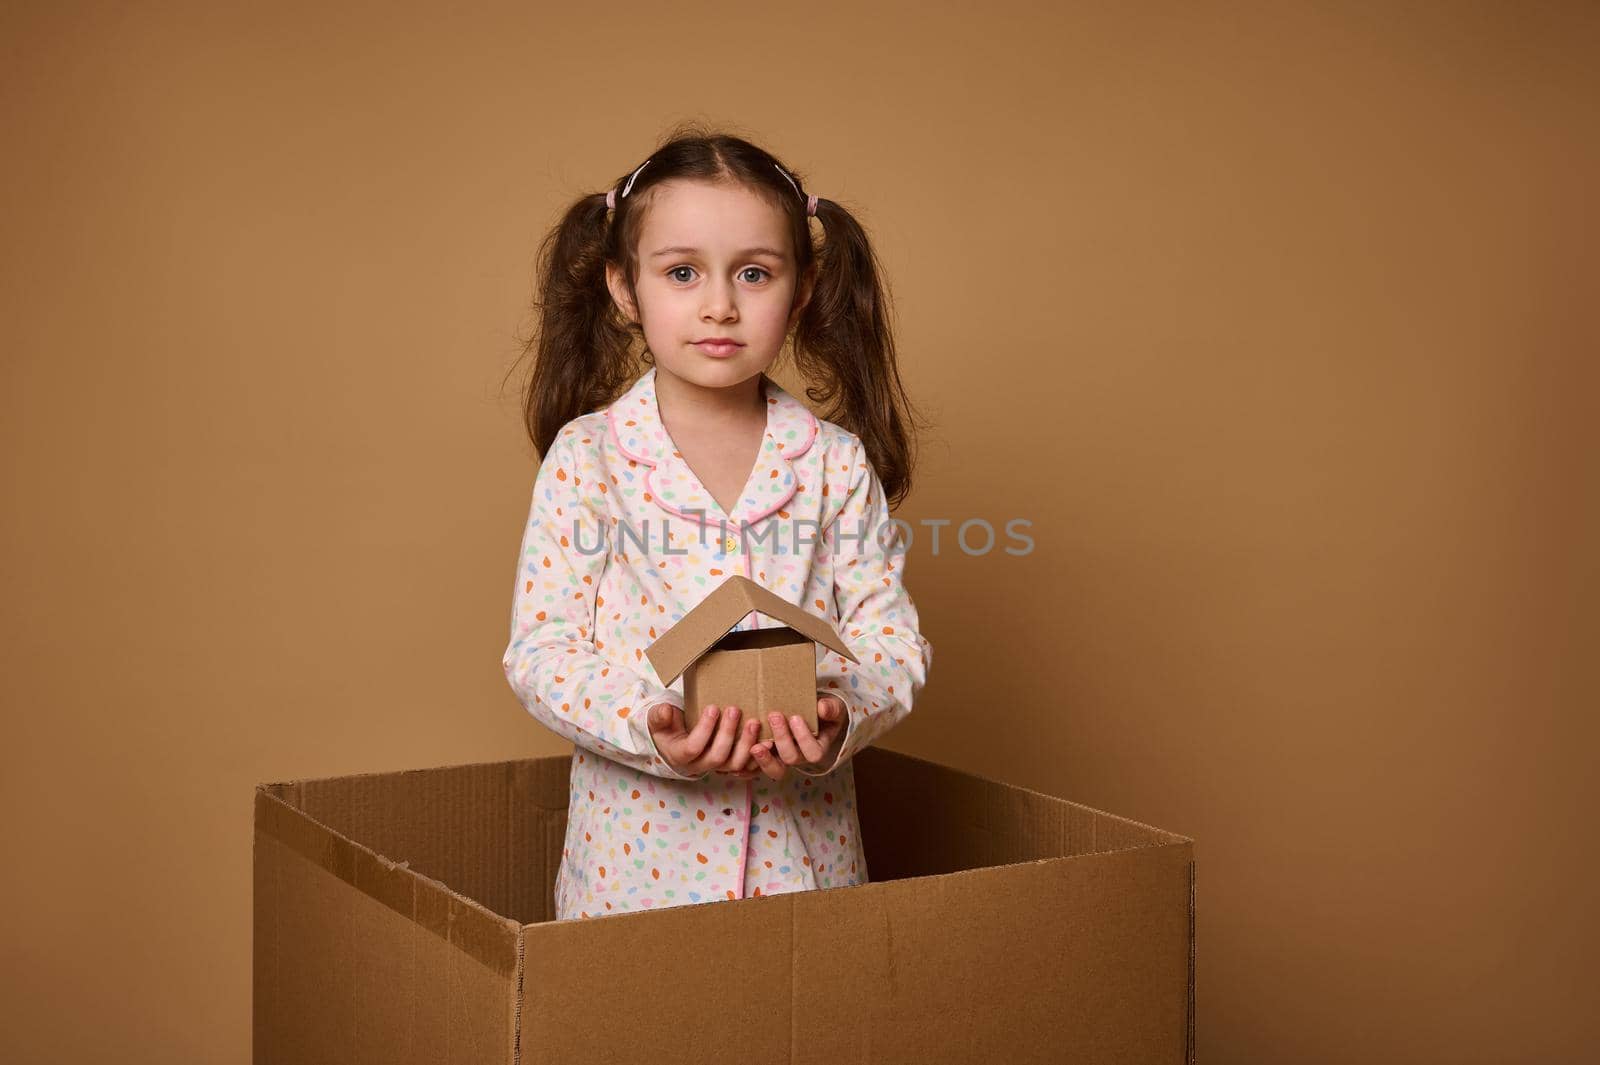 Little Caucasian girl, adorable child in pajamas holds a craft cardboard house model being inside a box, against beige background with copy space for ads. The concept of investment, housing